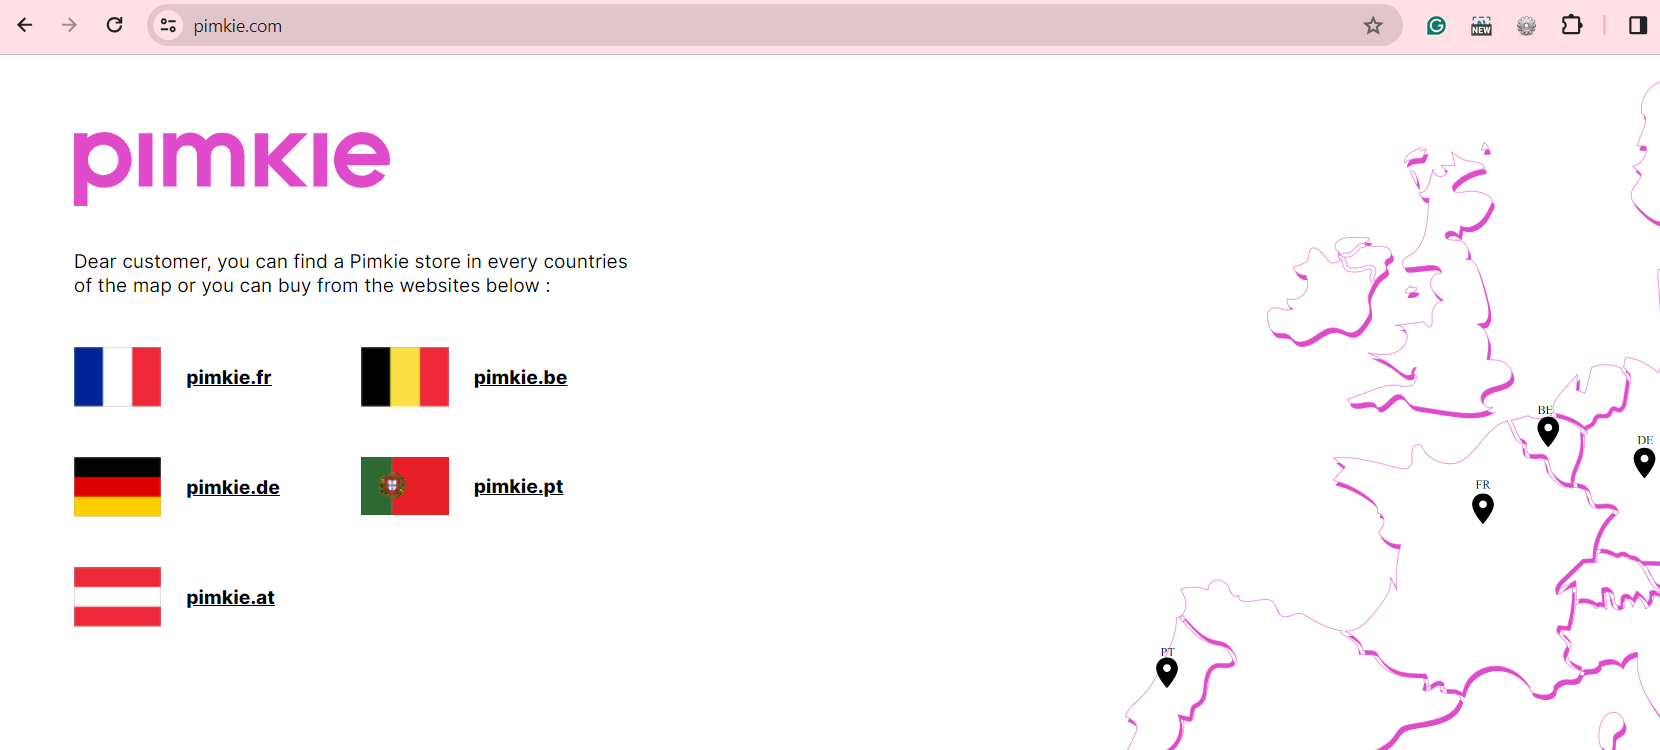 Pimkie uses country-specific TLDs